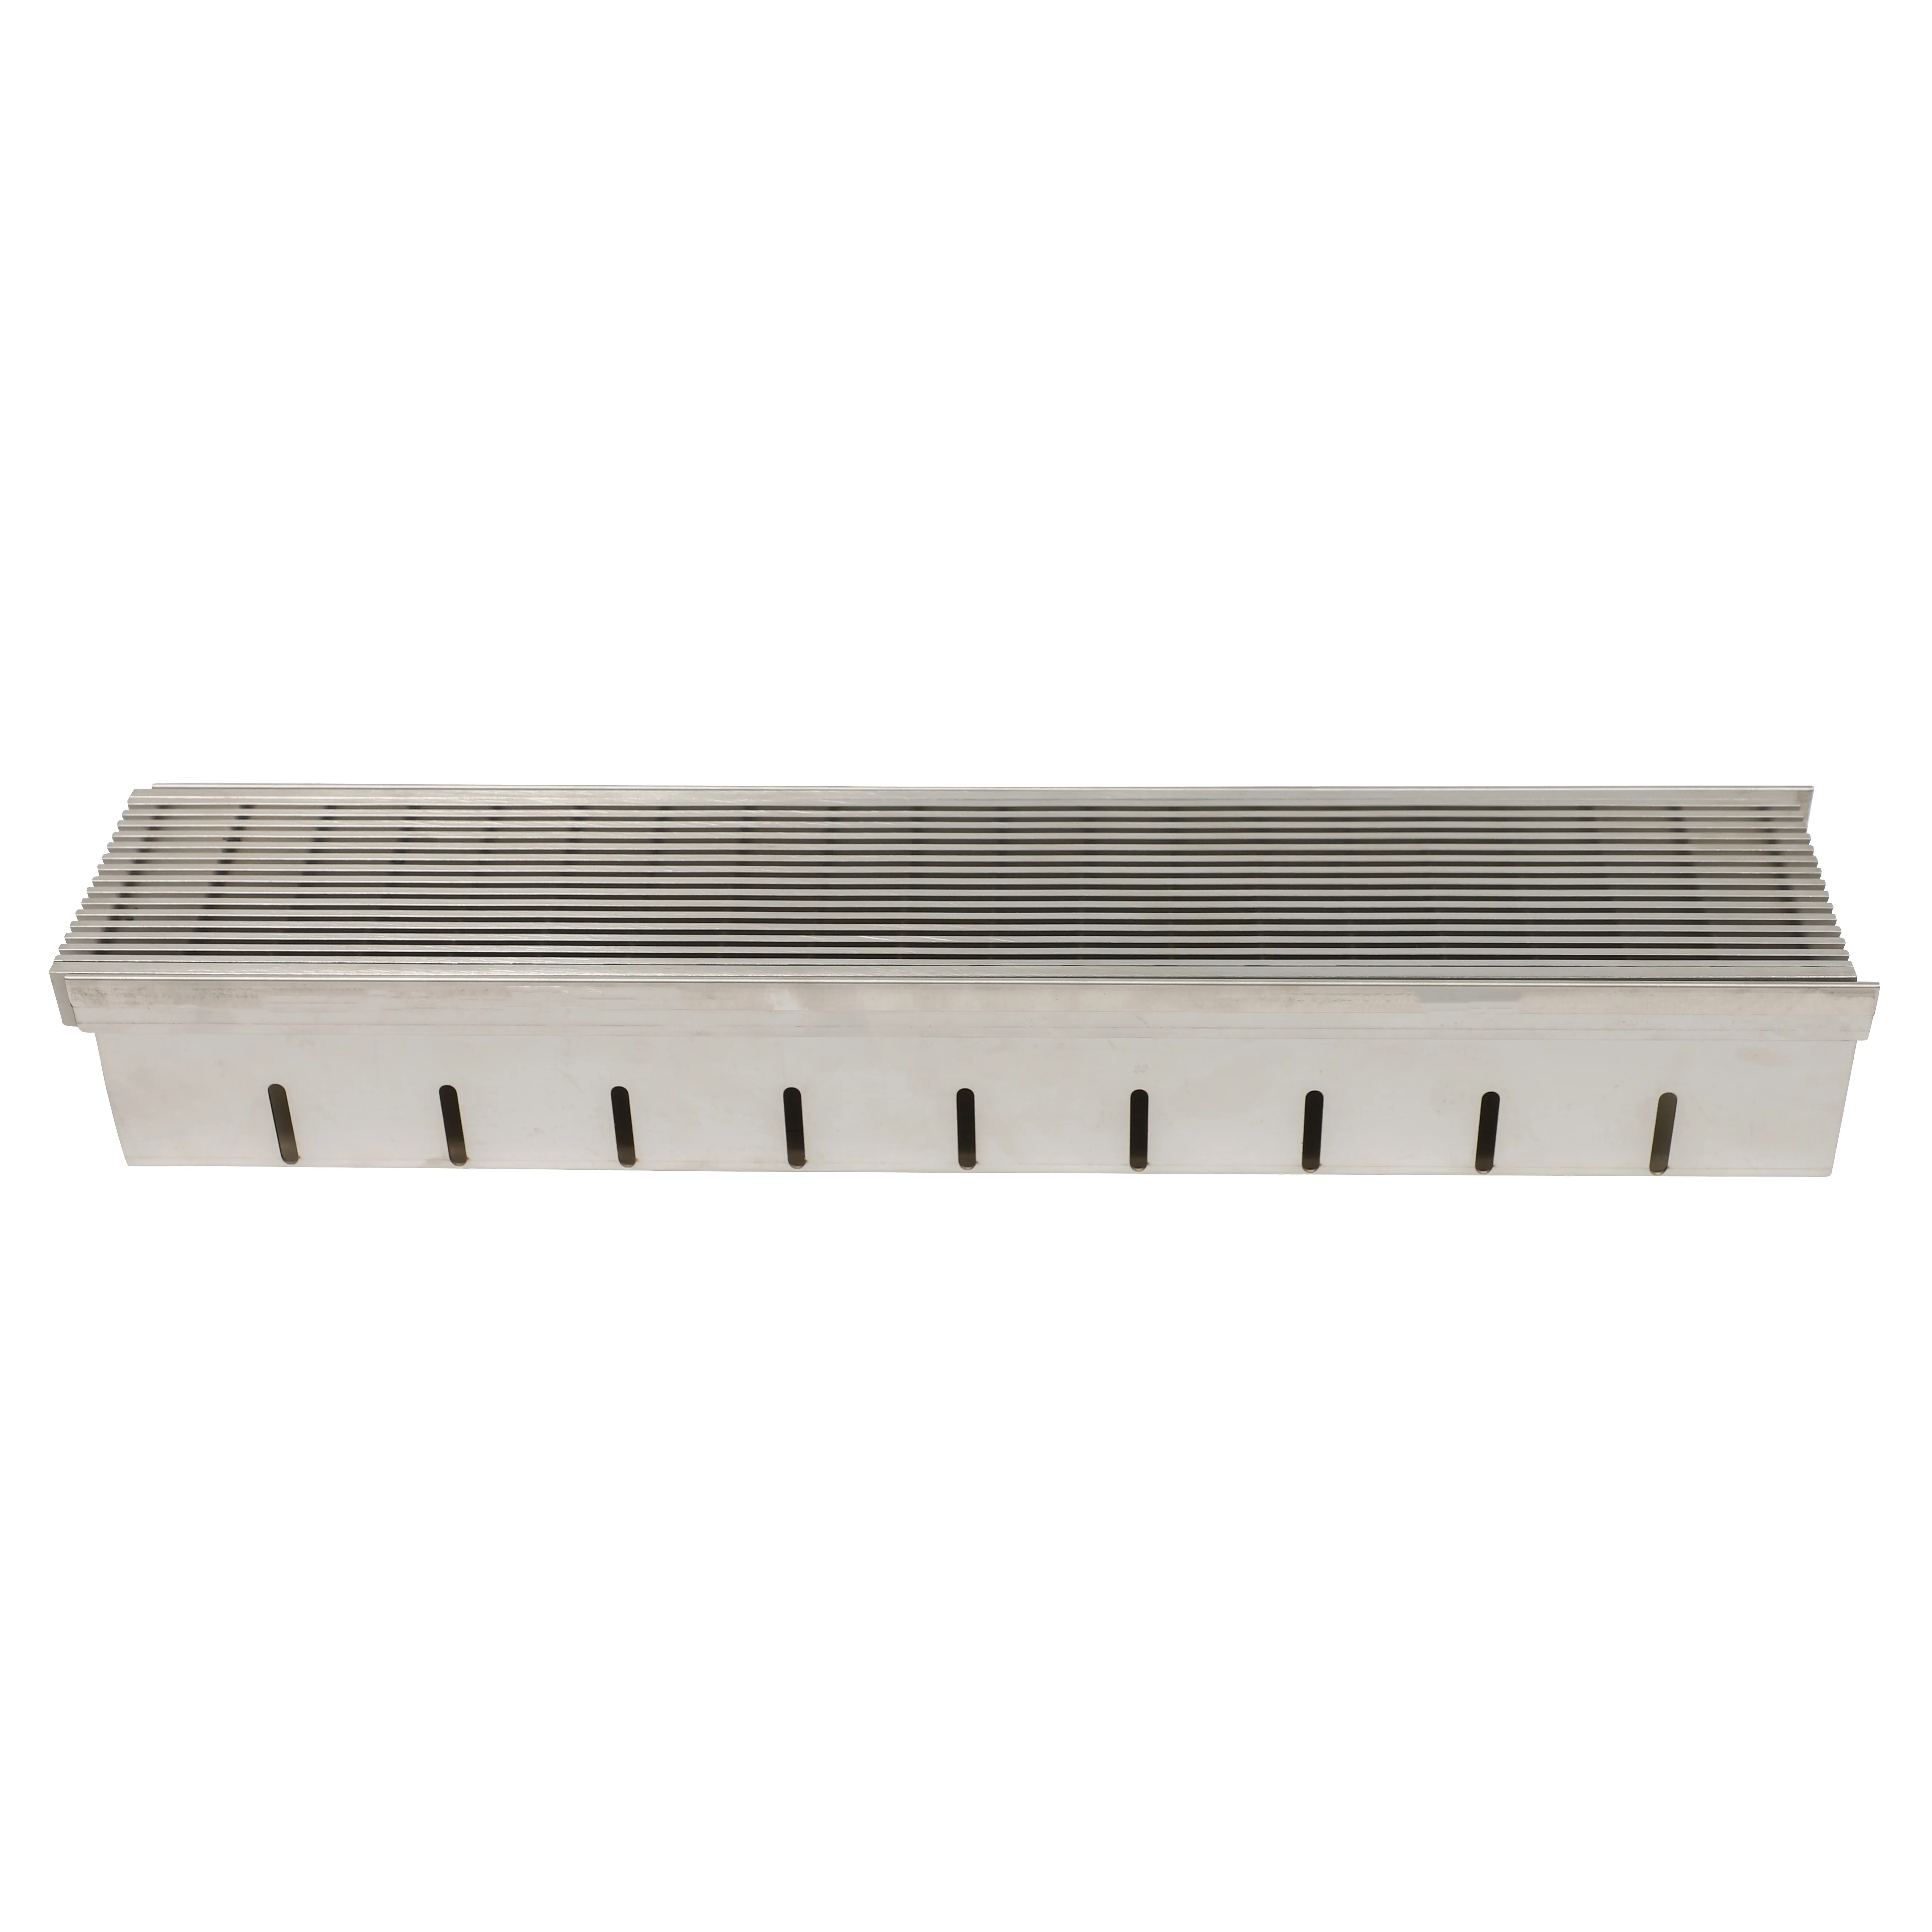 Custom Drainage Channel Concrete Linear Drainage Stainless Steel Drainage Floor Drain